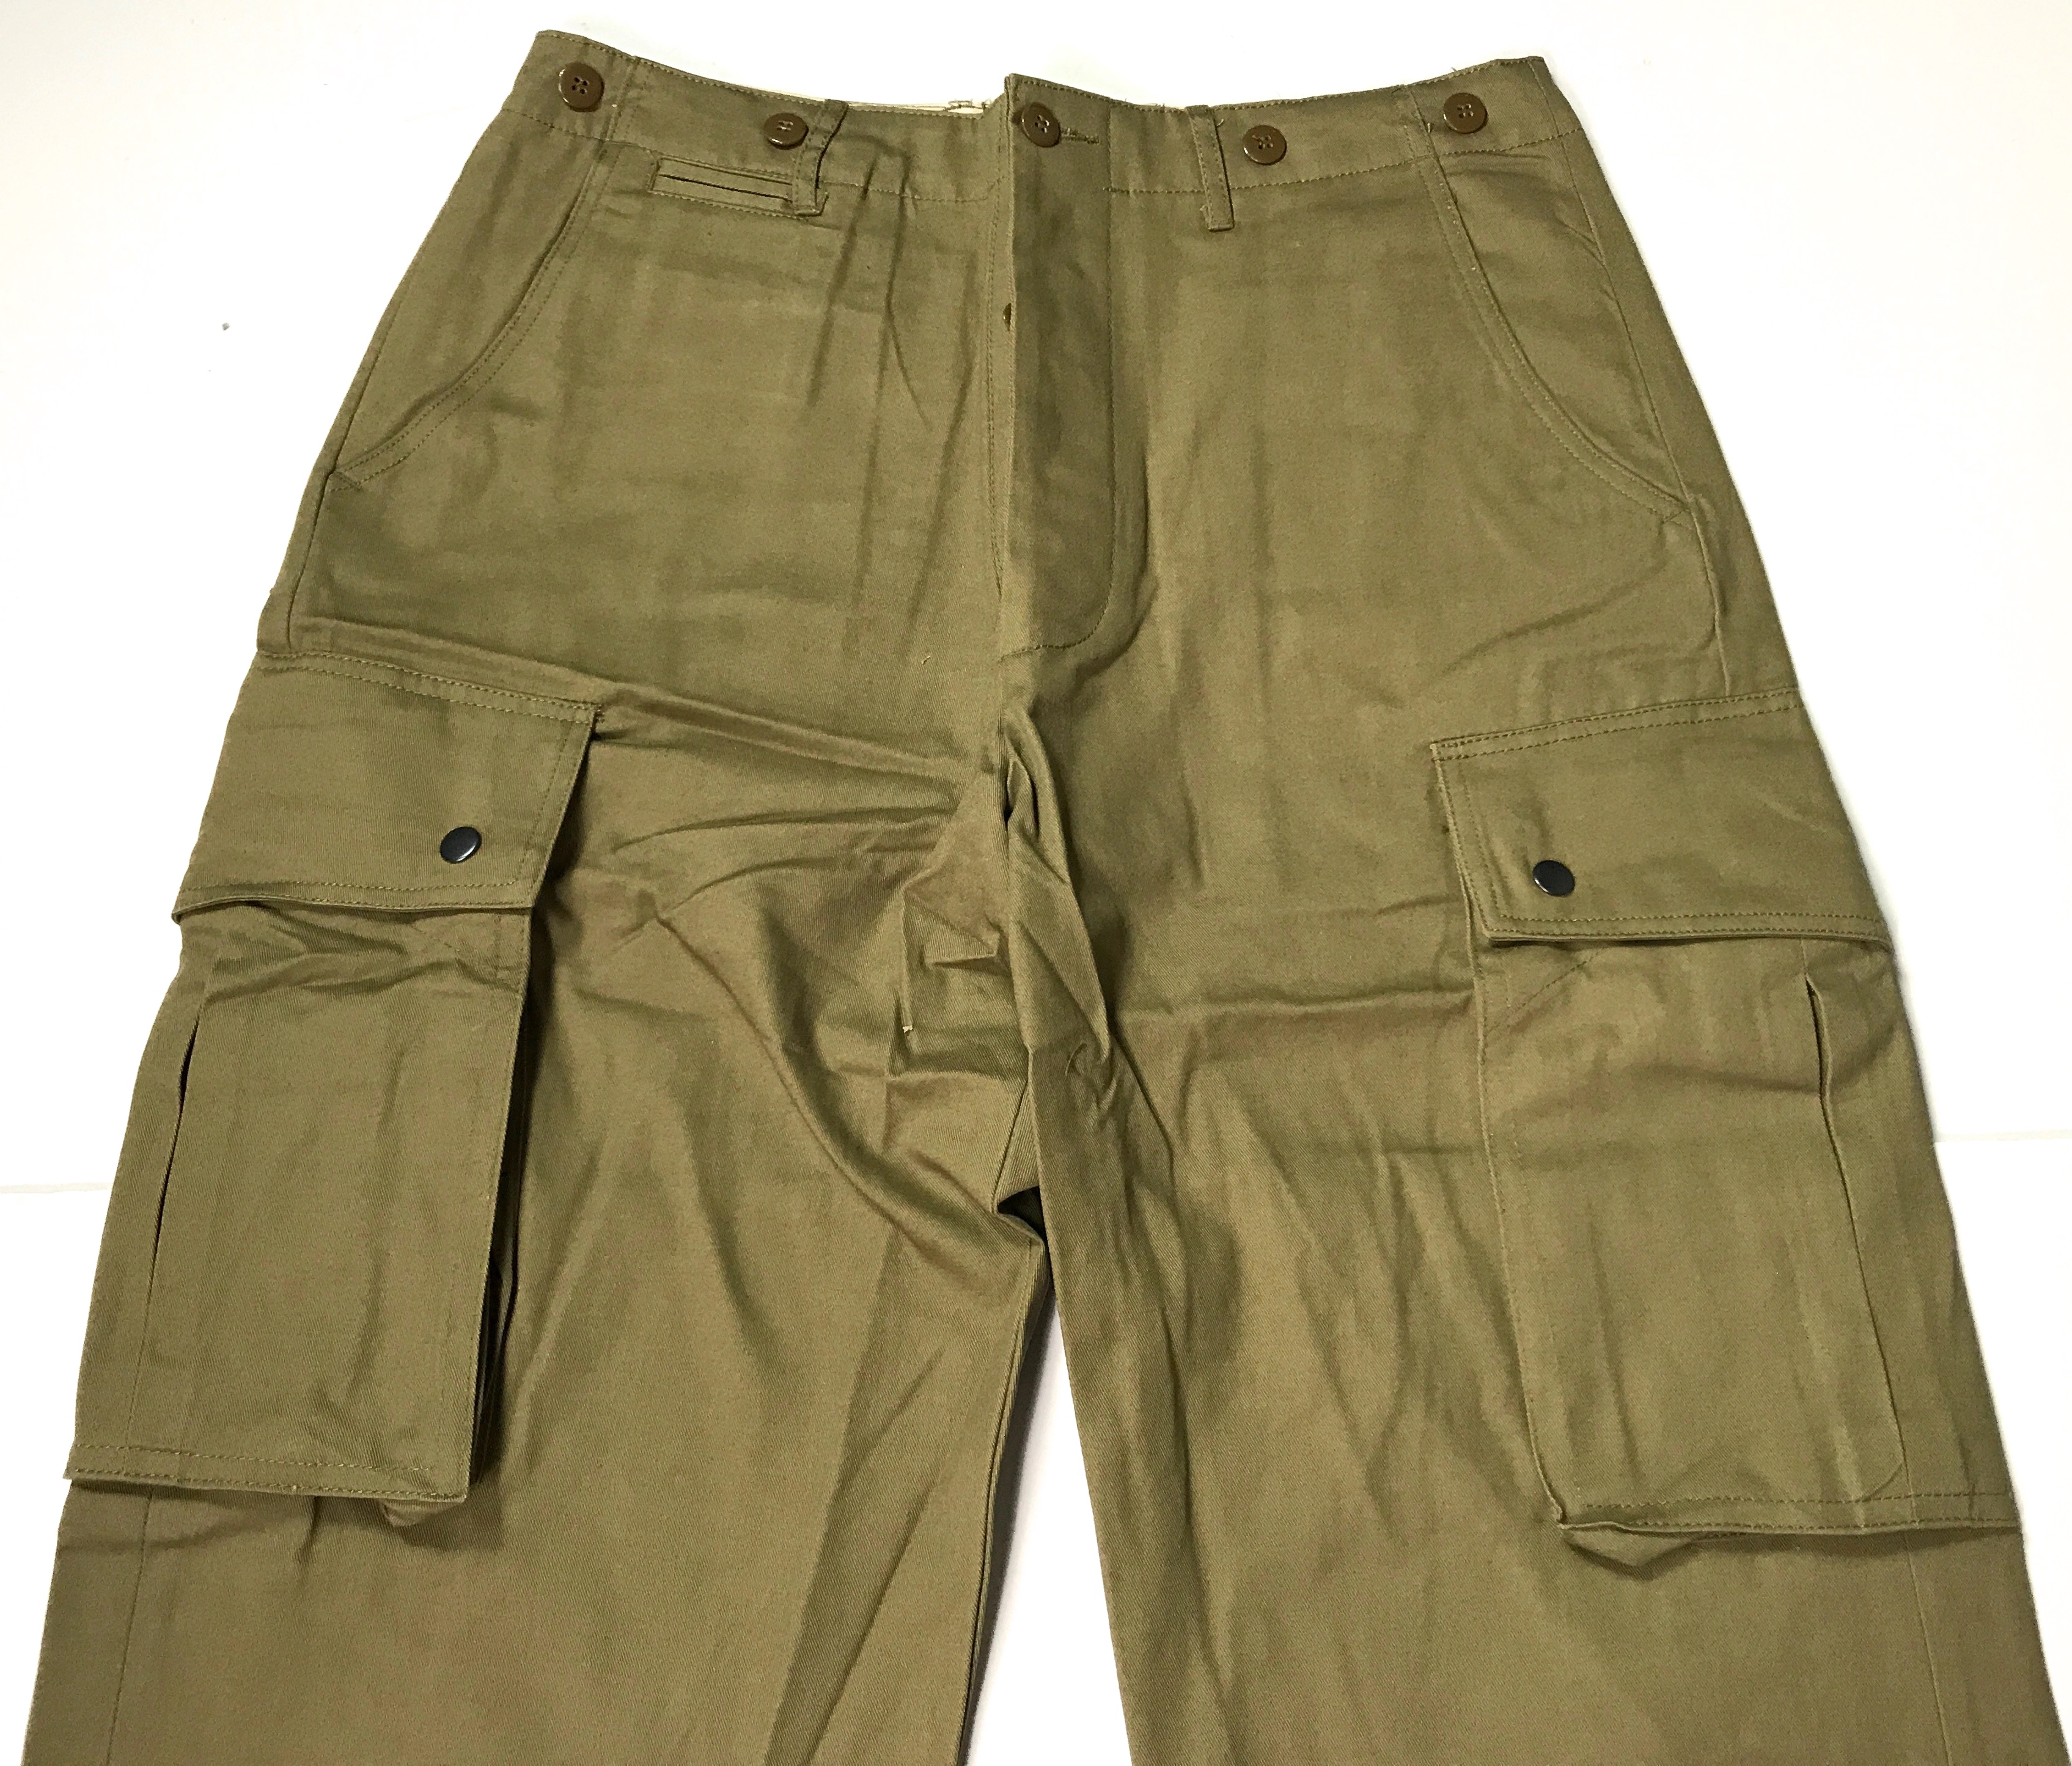 WWII US AIRBORNE PARATROOPER UNREINFORCED M42 JUMP TROUSERS-3XLARGE